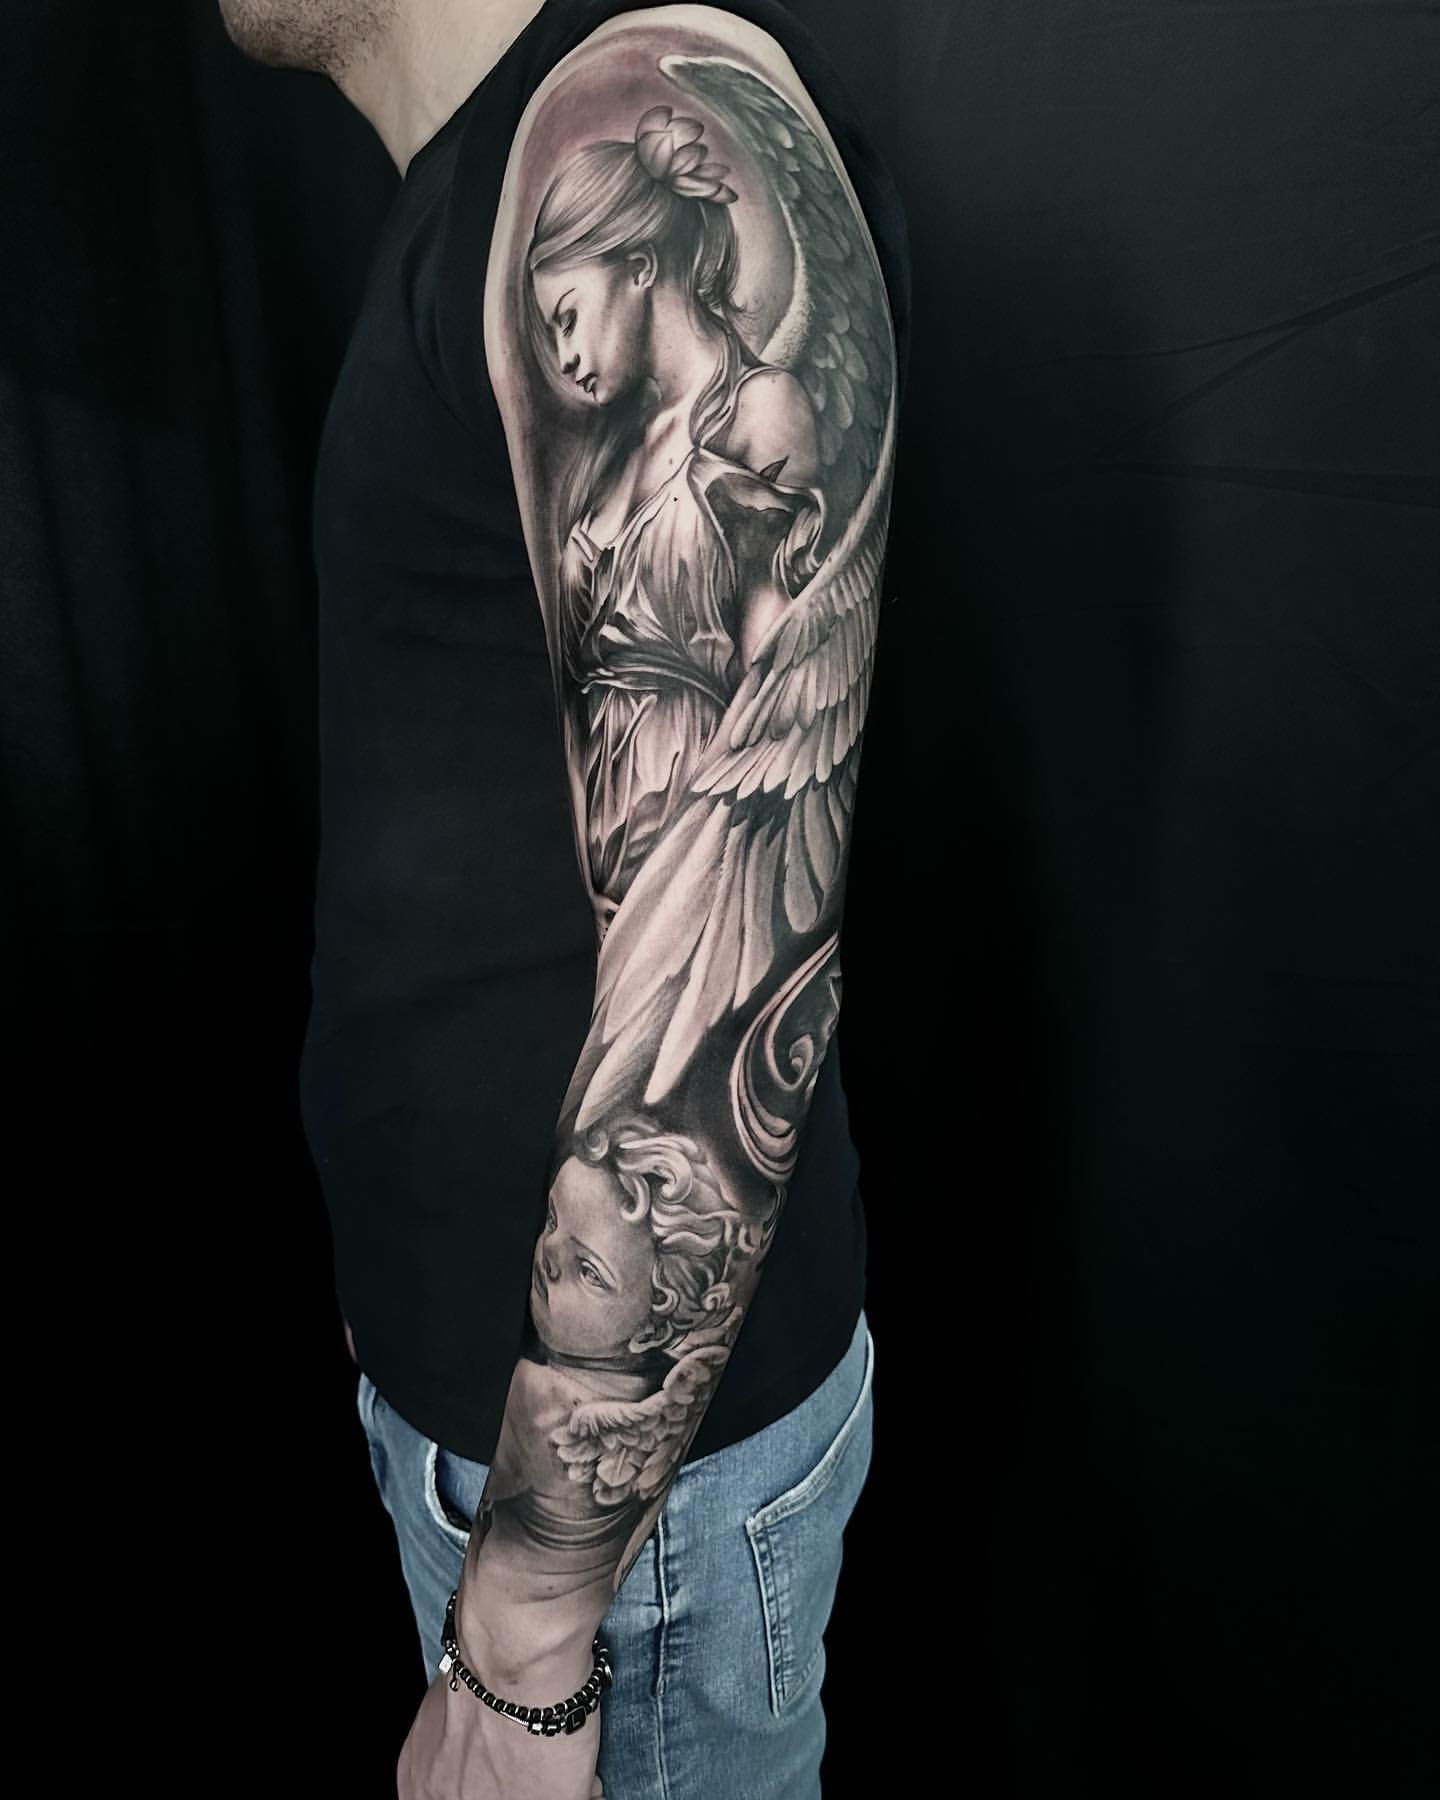 One take religious sleeve by Chris T.... - Babydolls Tattoo | Facebook